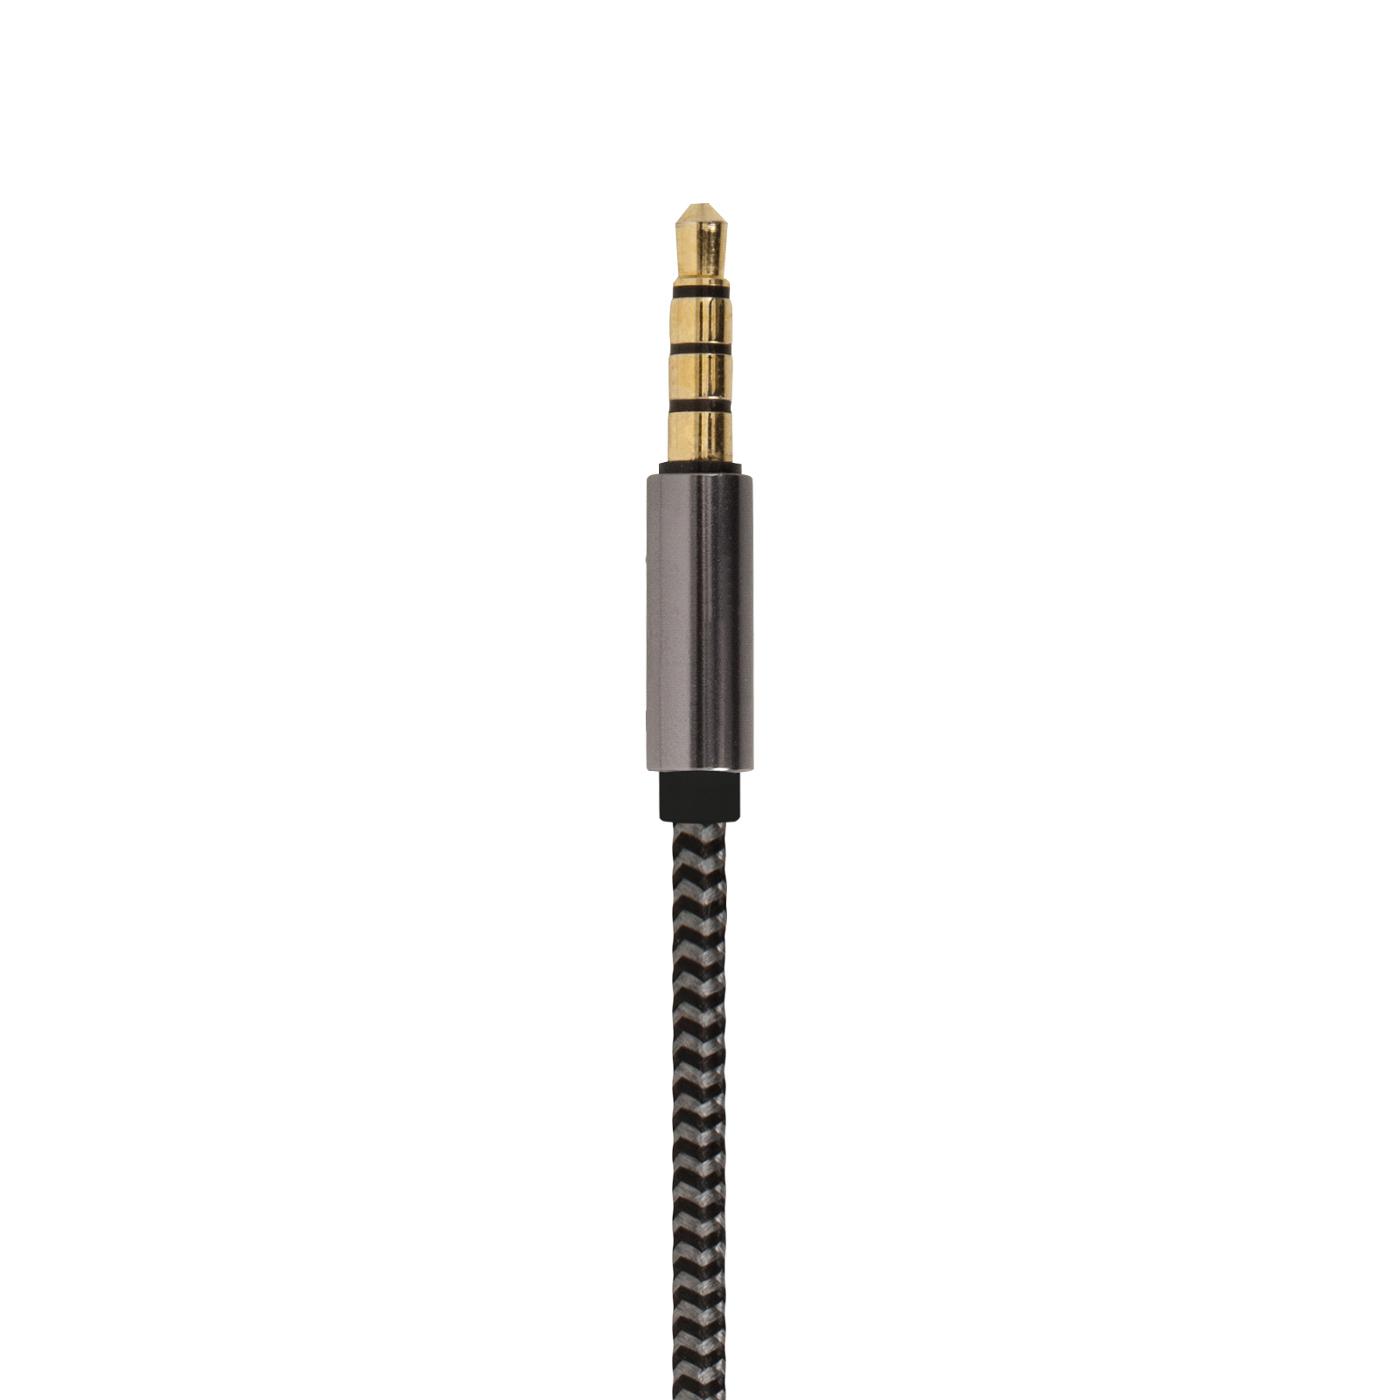 Helix 3.5mm Aux Connector; image 2 of 2